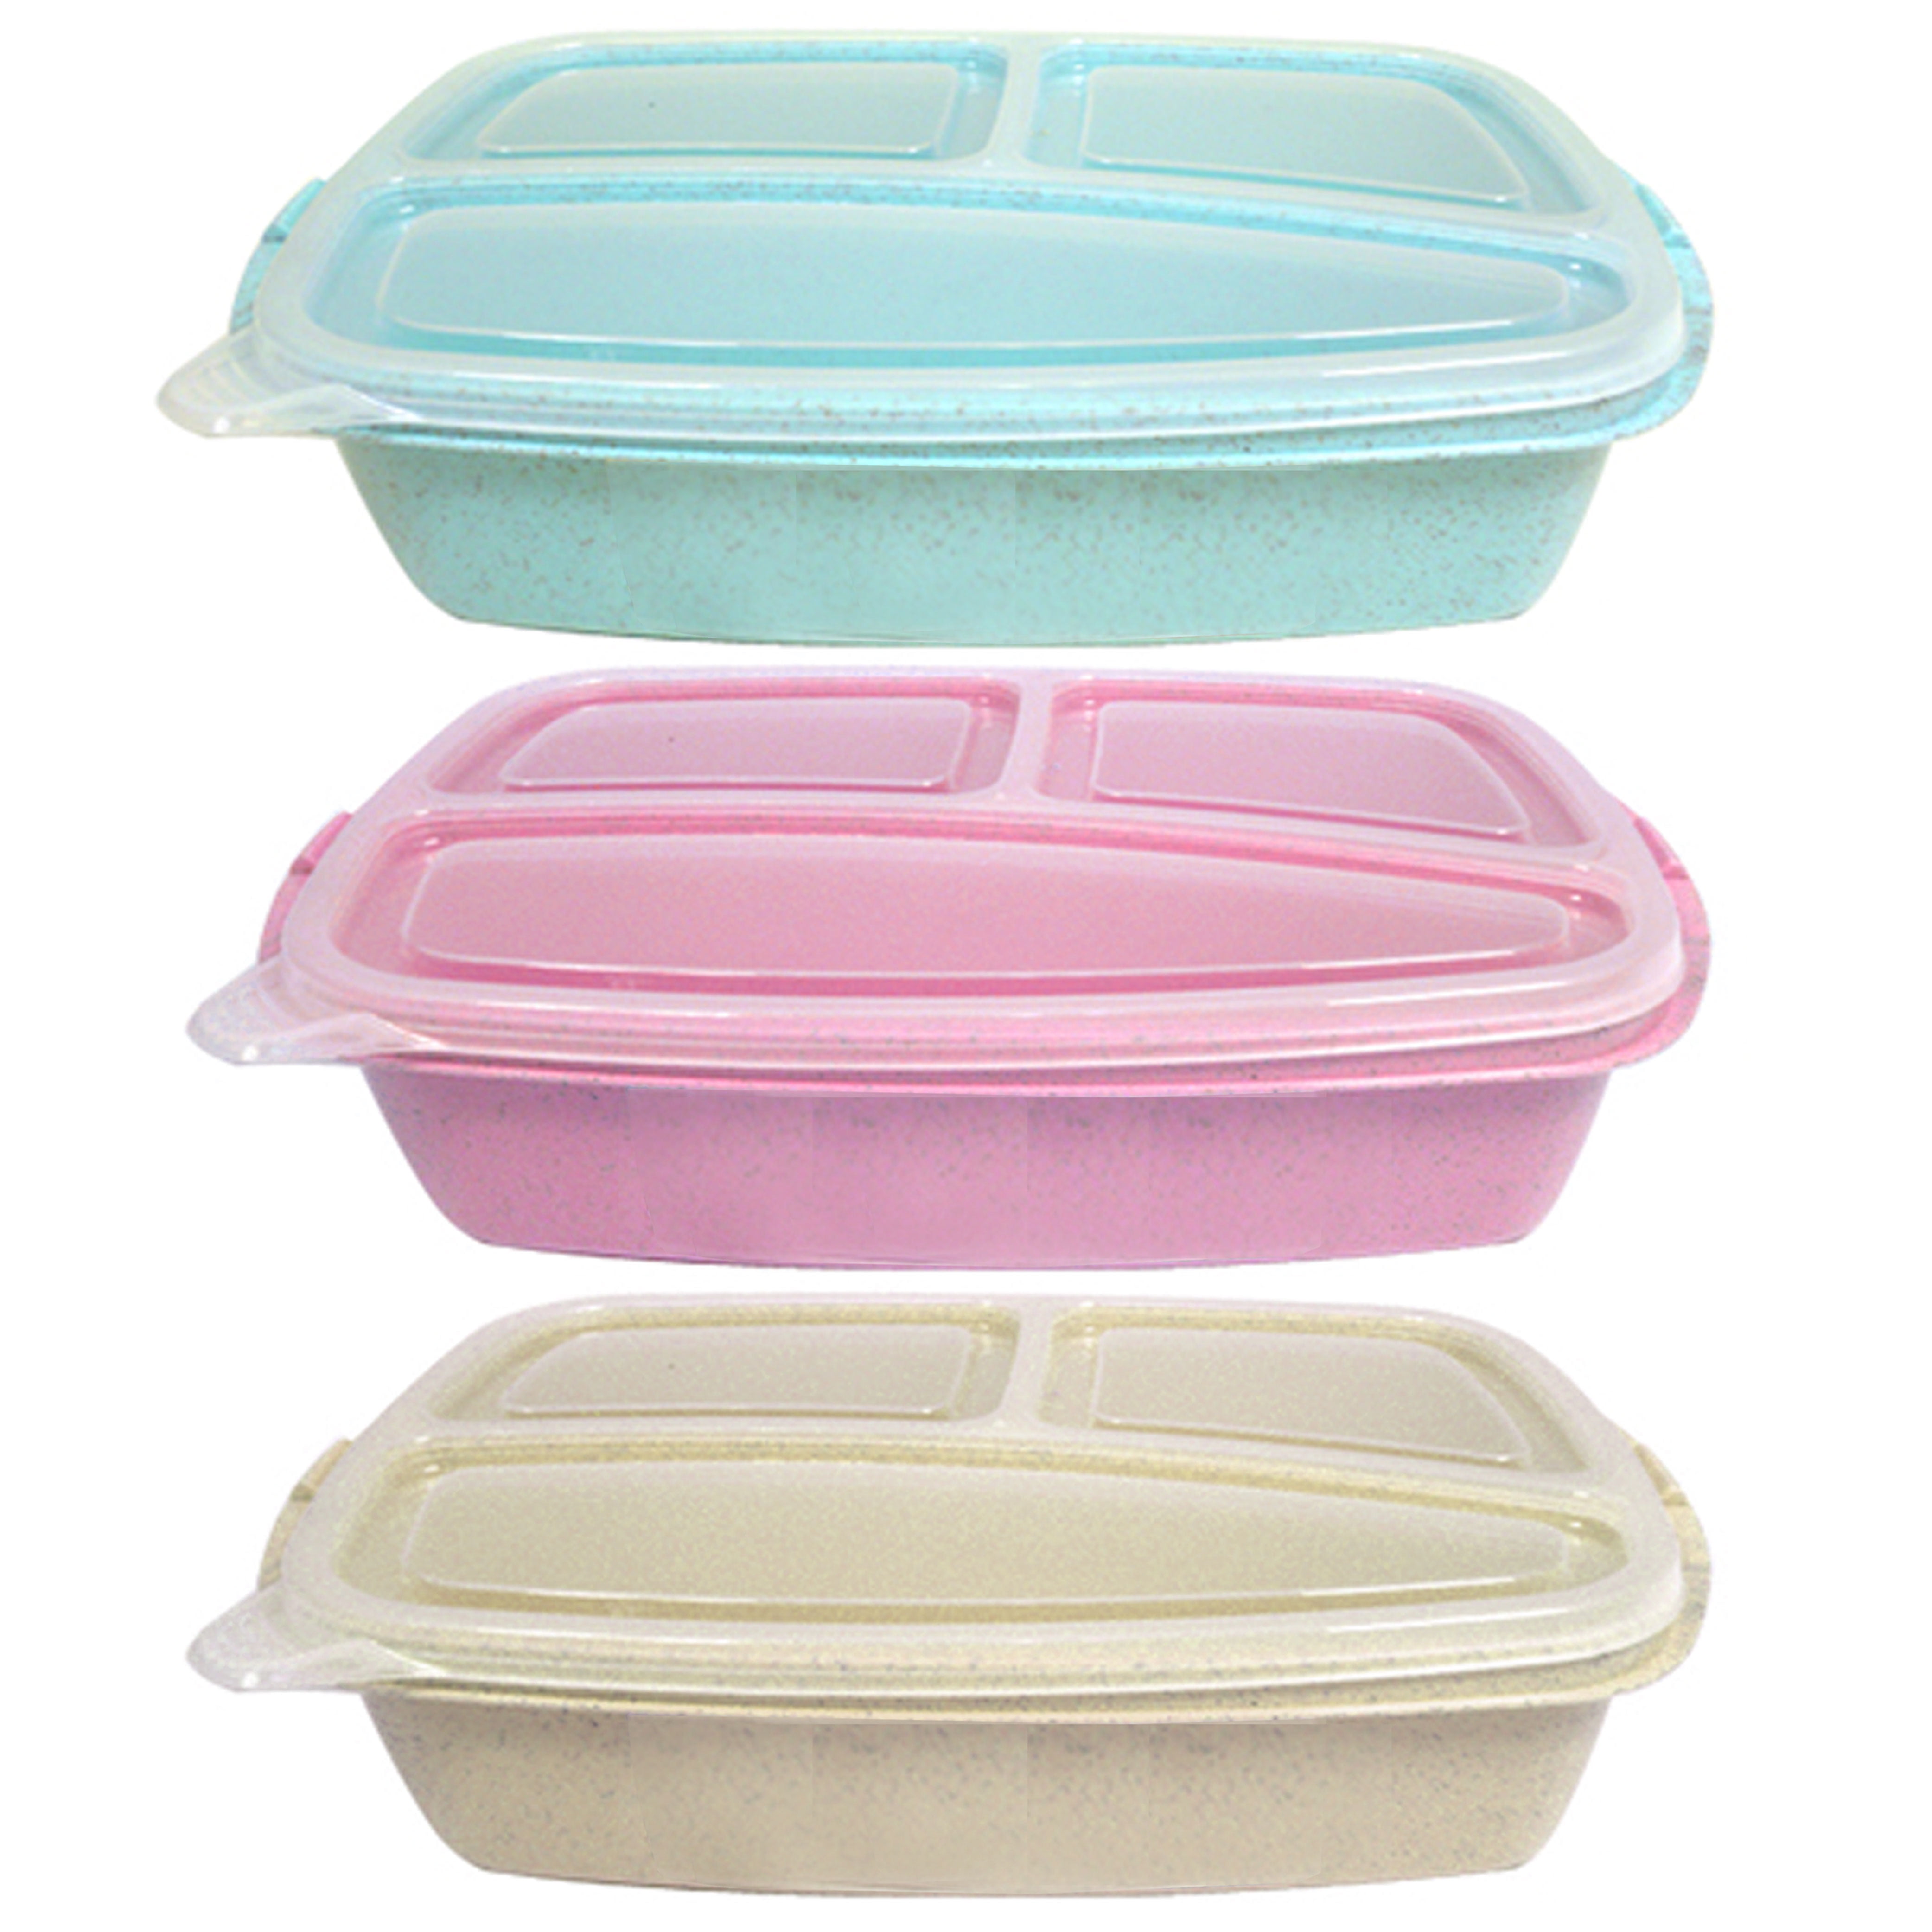 6 Large Microwave Food Storage Containers Section Divided Plates W/ Li —  AllTopBargains